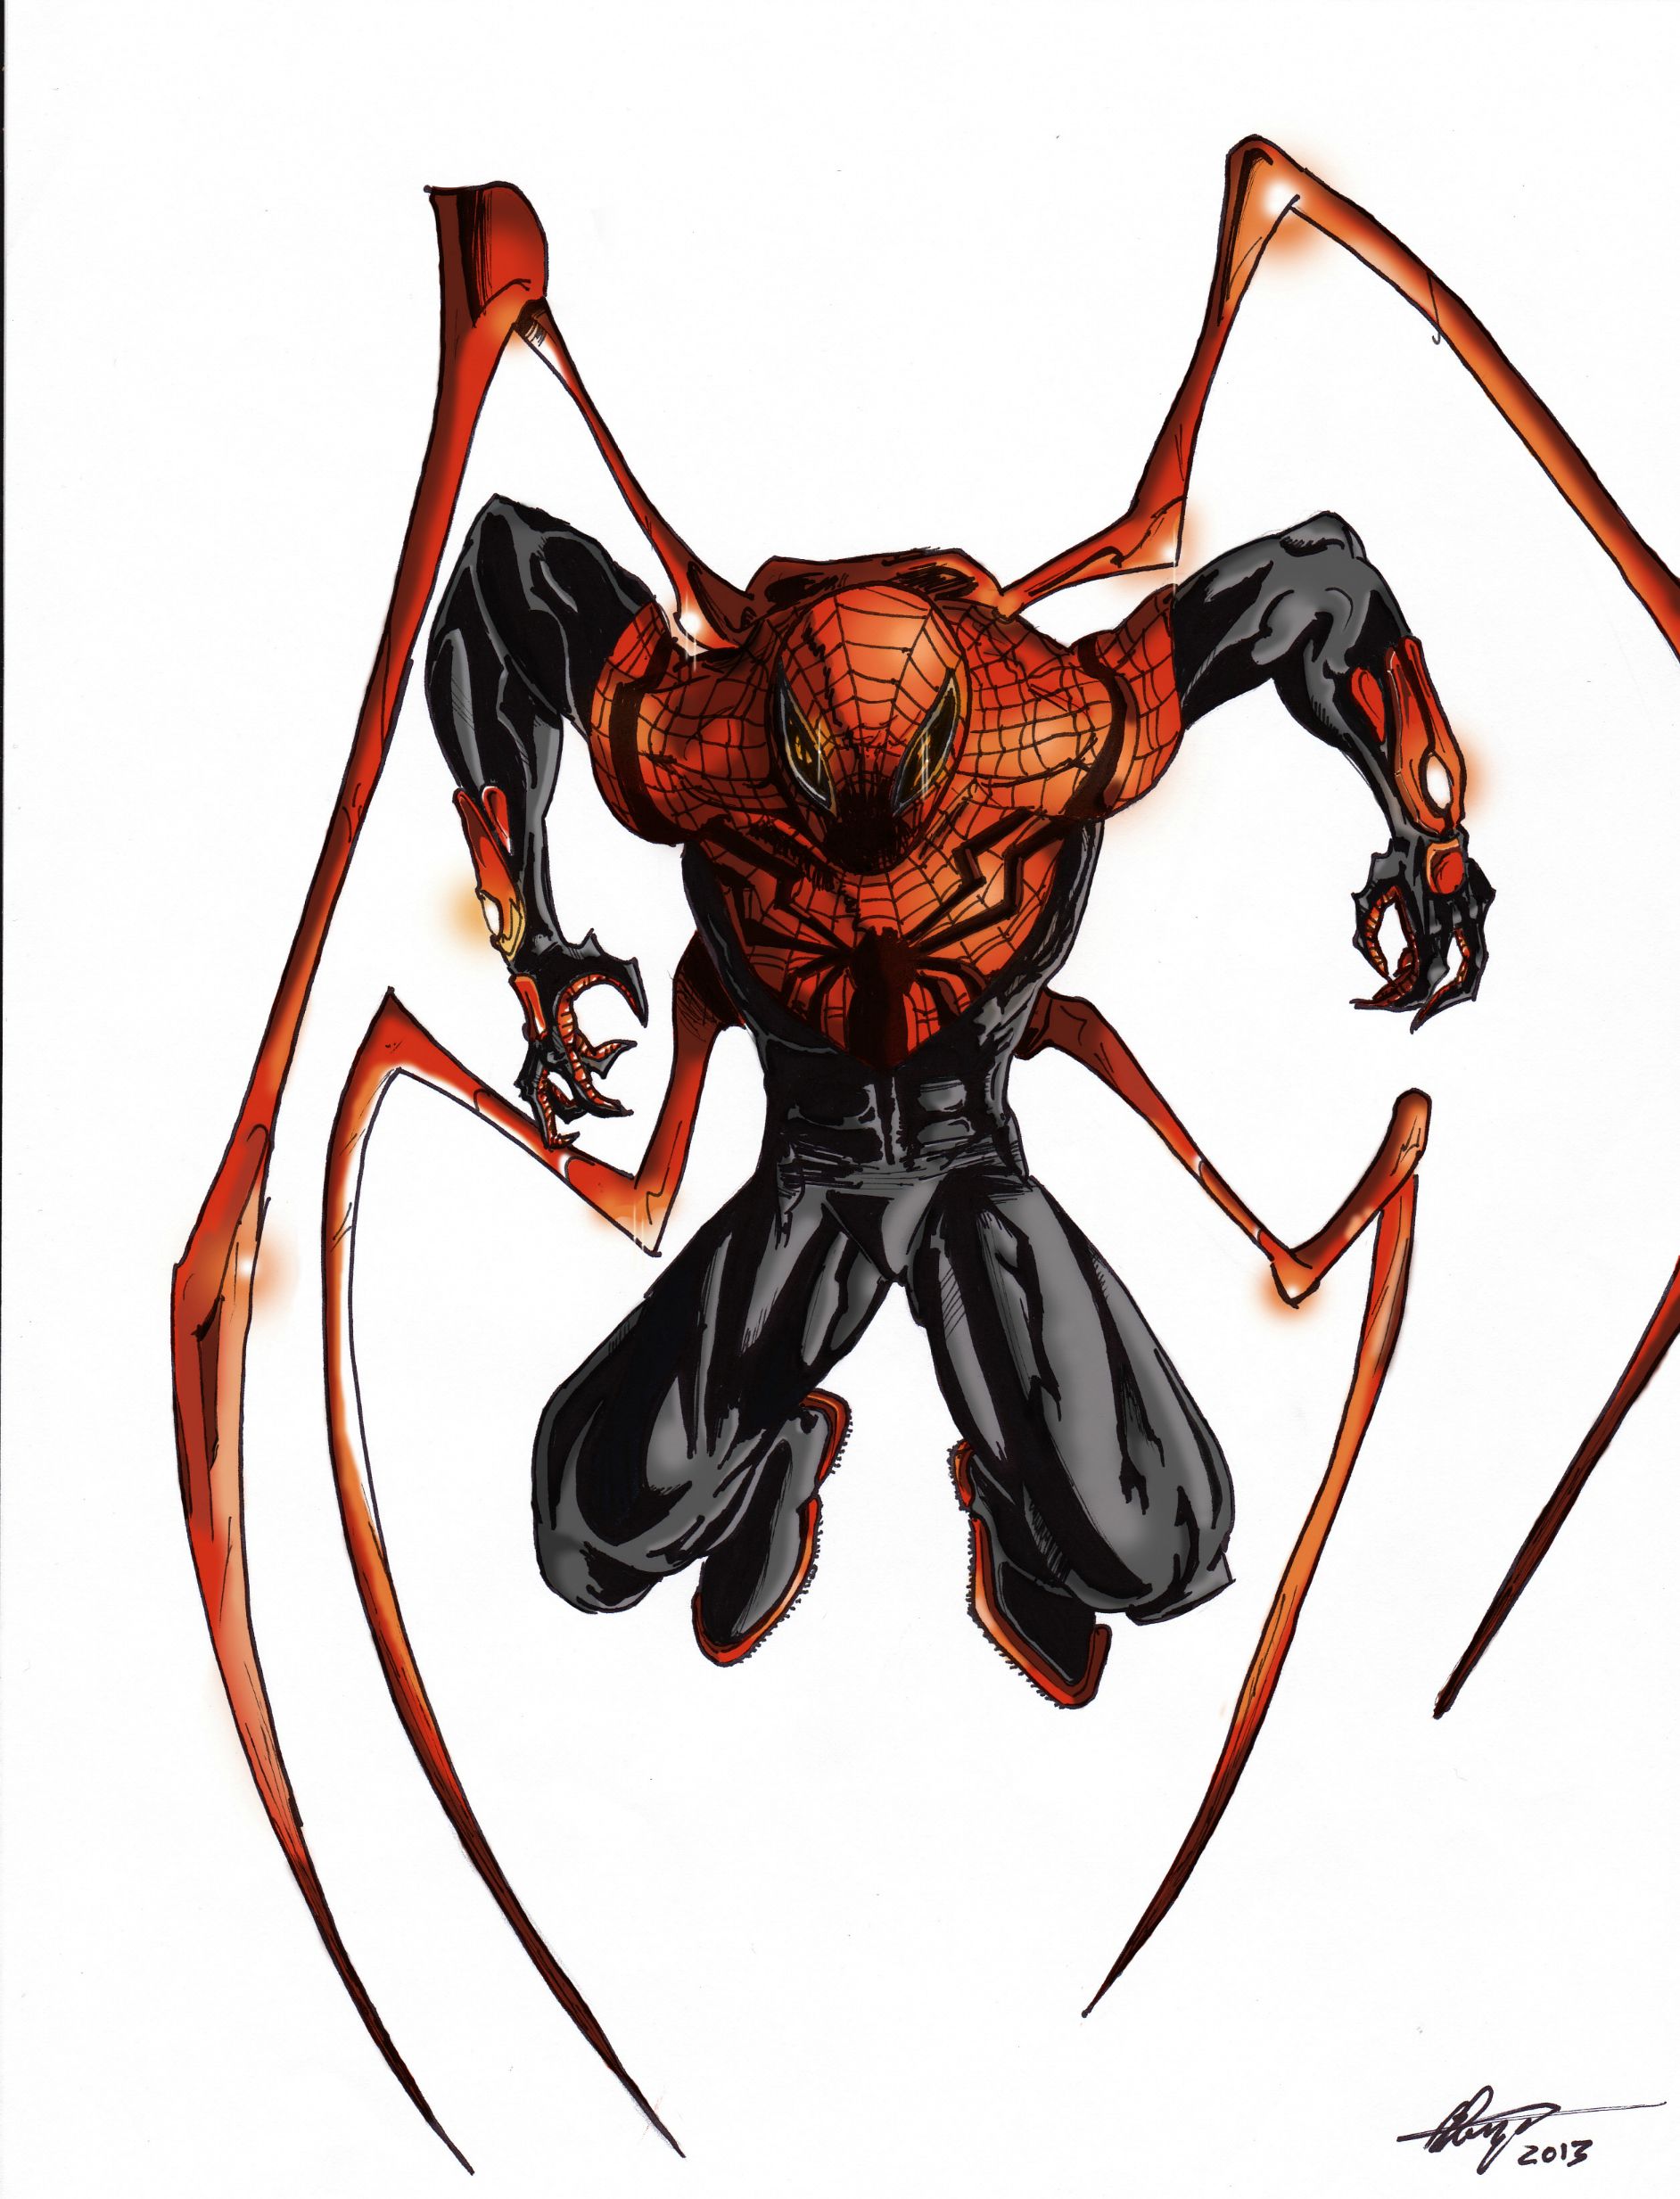 Superior Spider-man High Quality Background on Wallpapers Vista